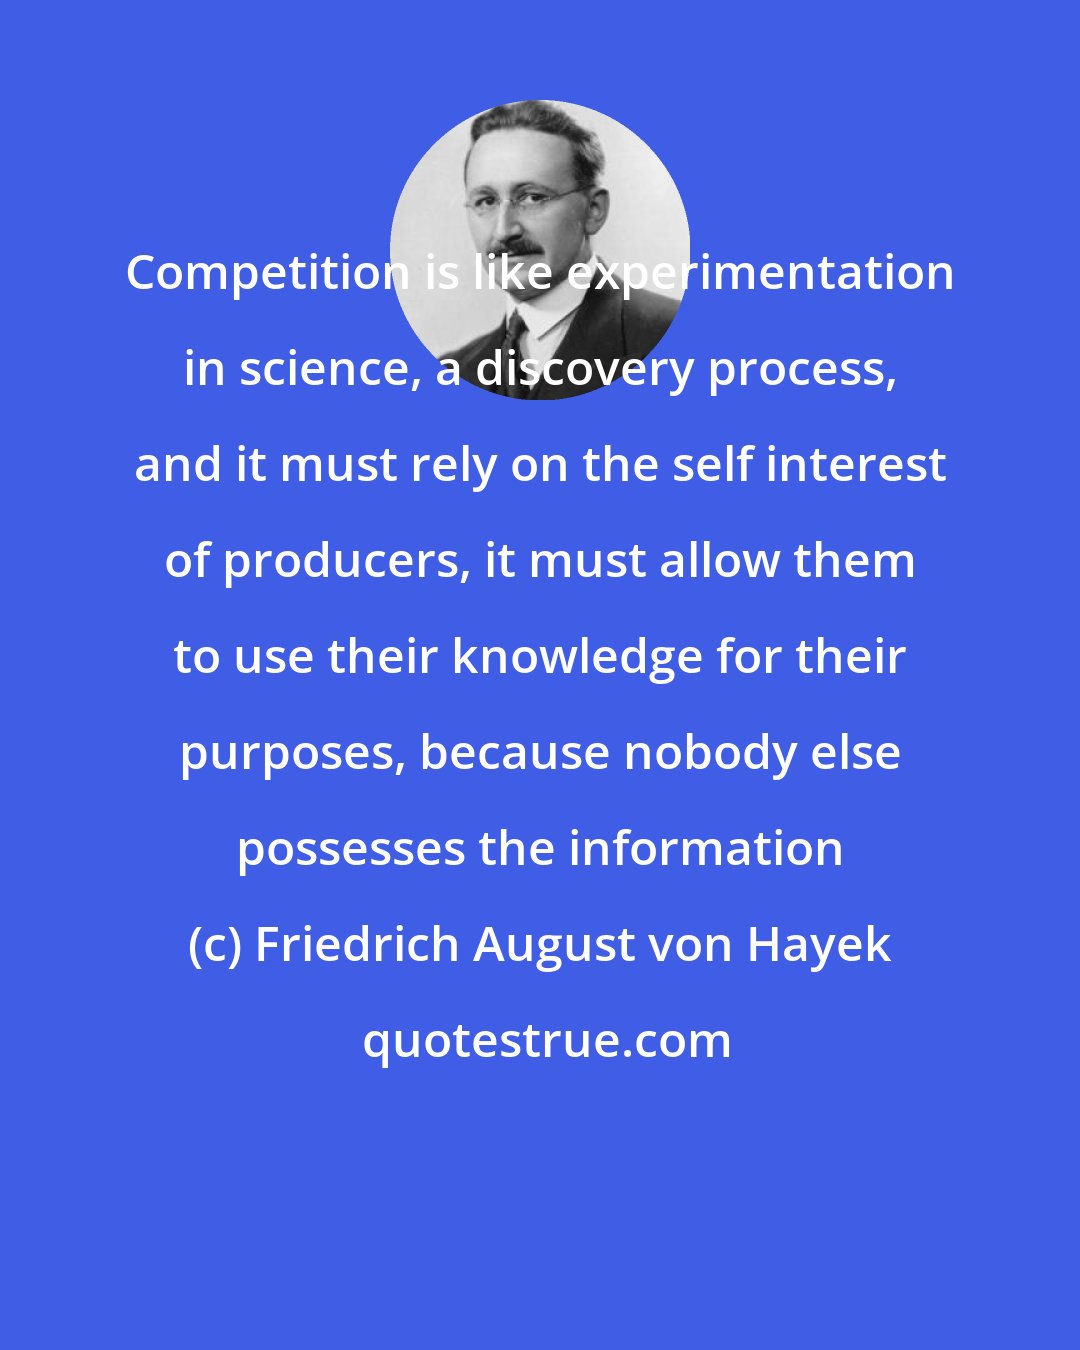 Friedrich August von Hayek: Competition is like experimentation in science, a discovery process, and it must rely on the self interest of producers, it must allow them to use their knowledge for their purposes, because nobody else possesses the information